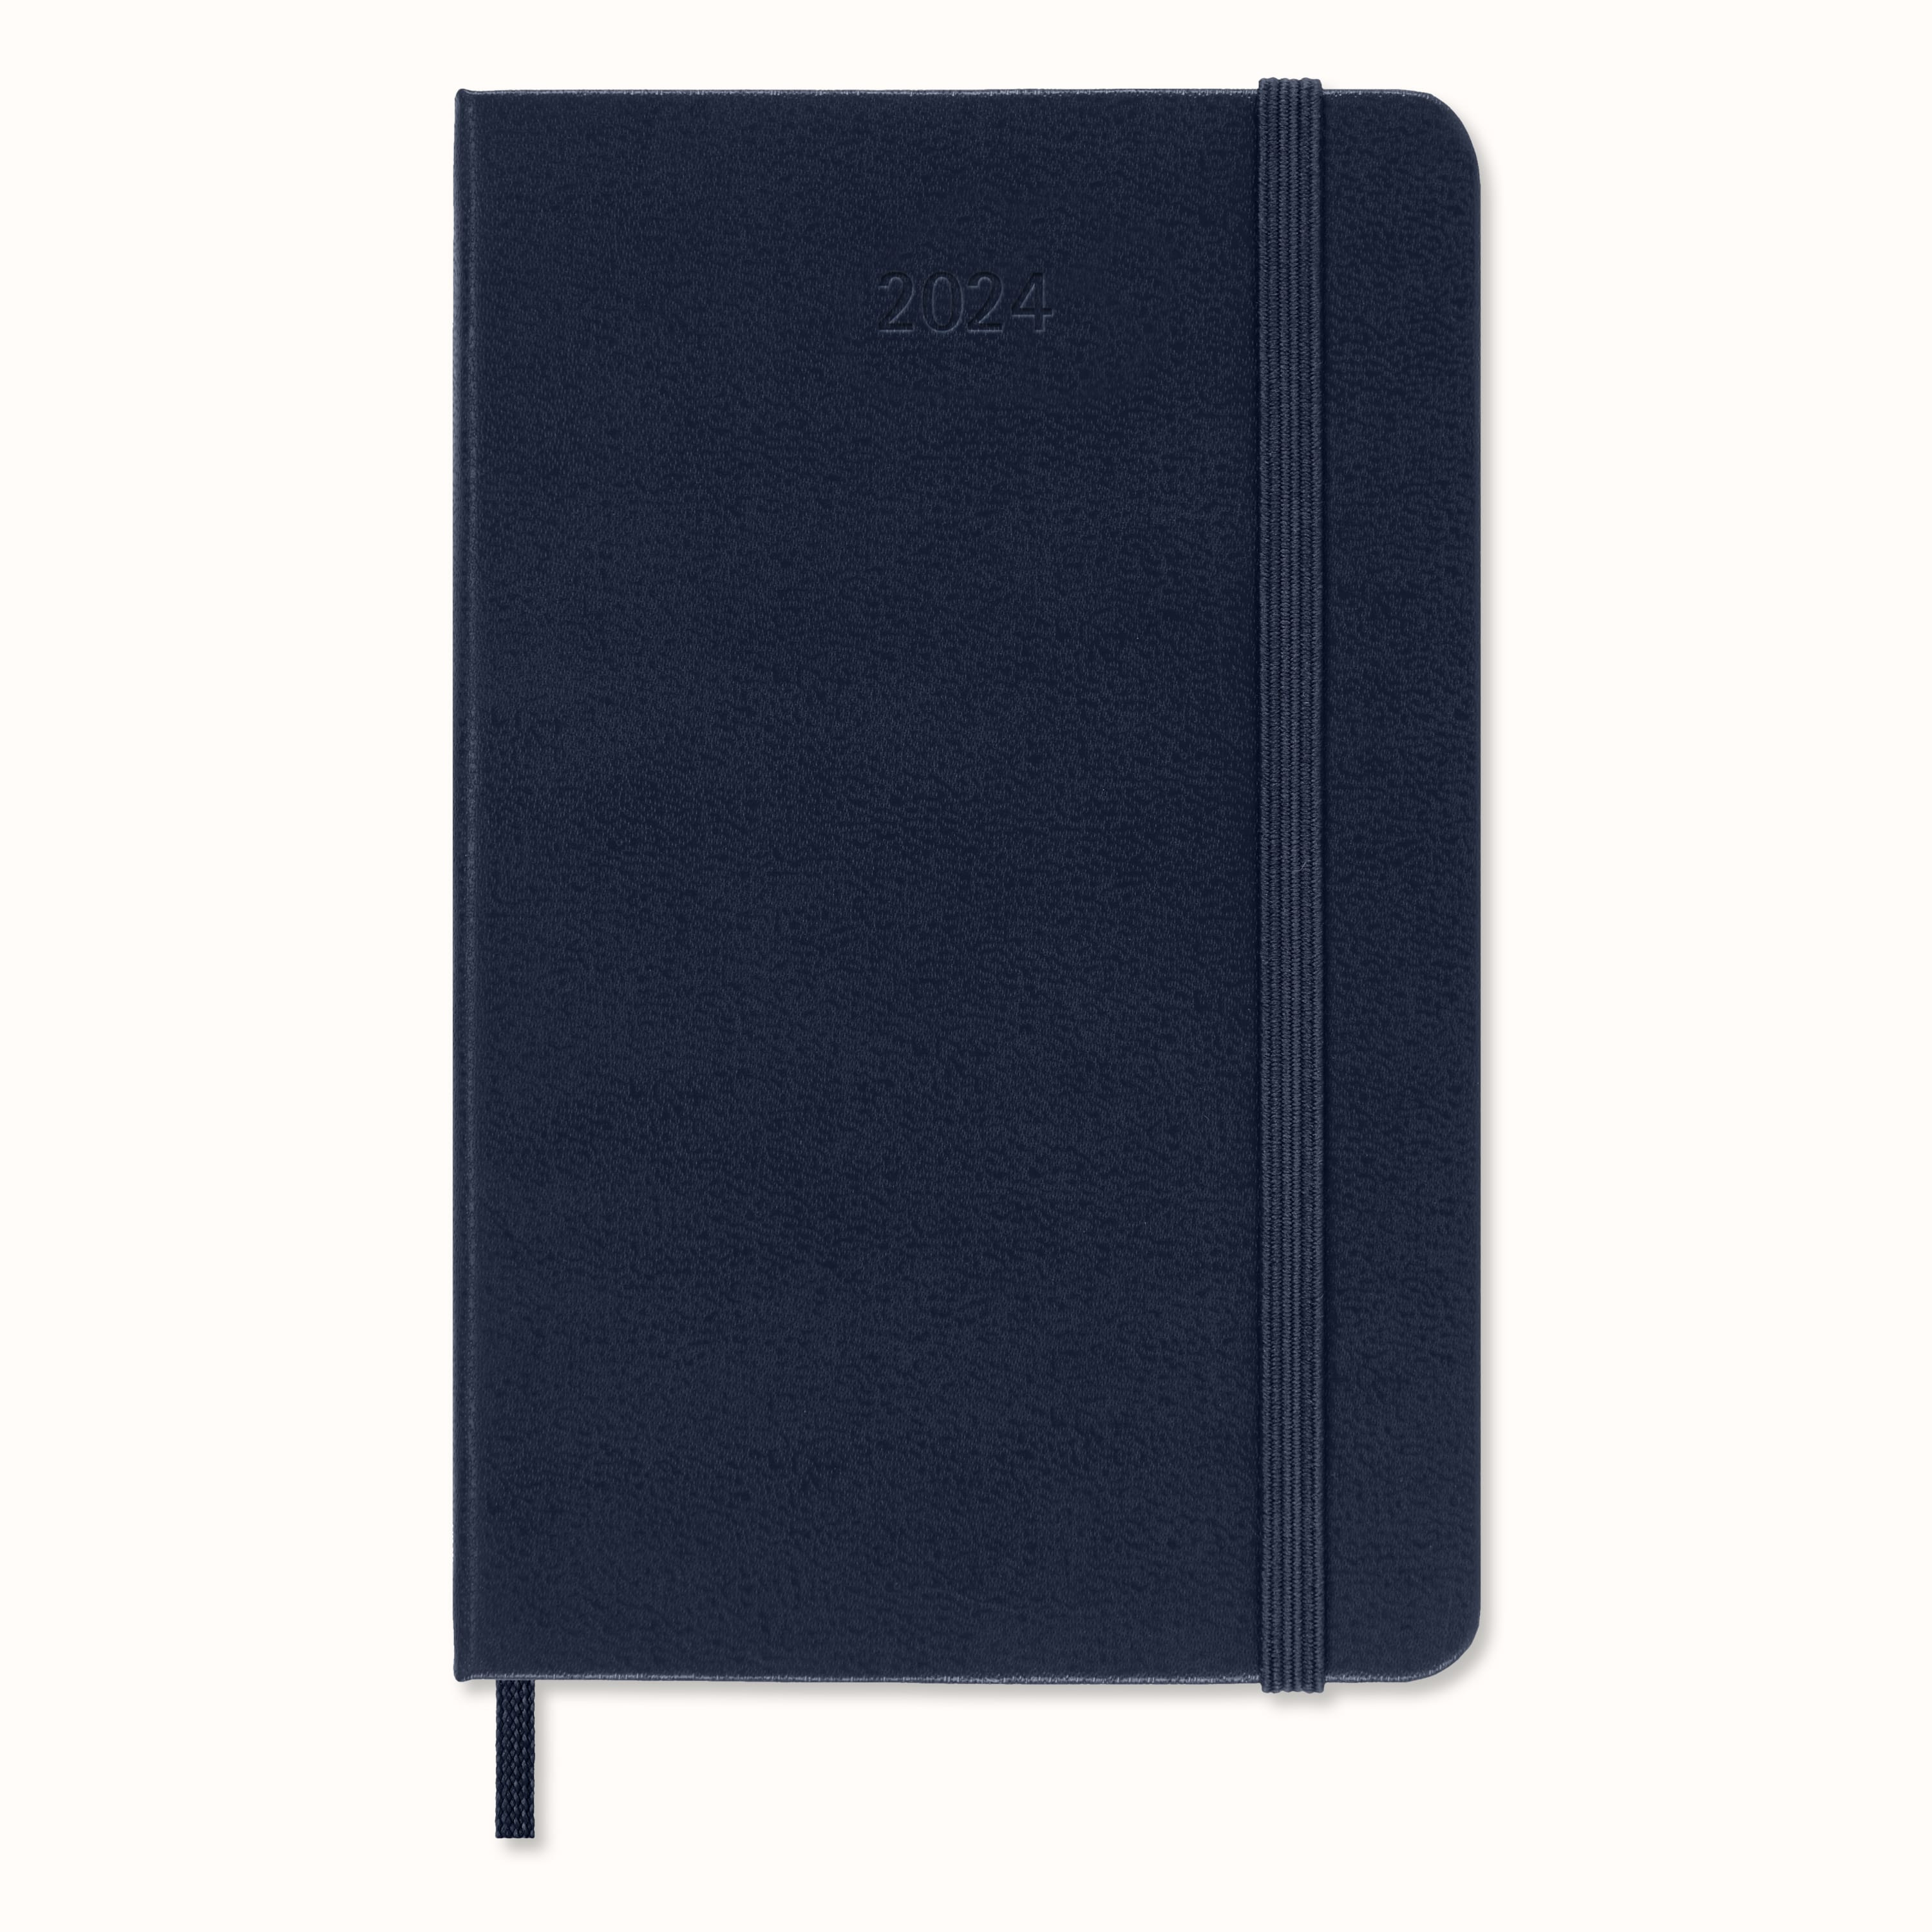 Moleskine 2024 Diary  12 Month Diary / Planner - Page per Day